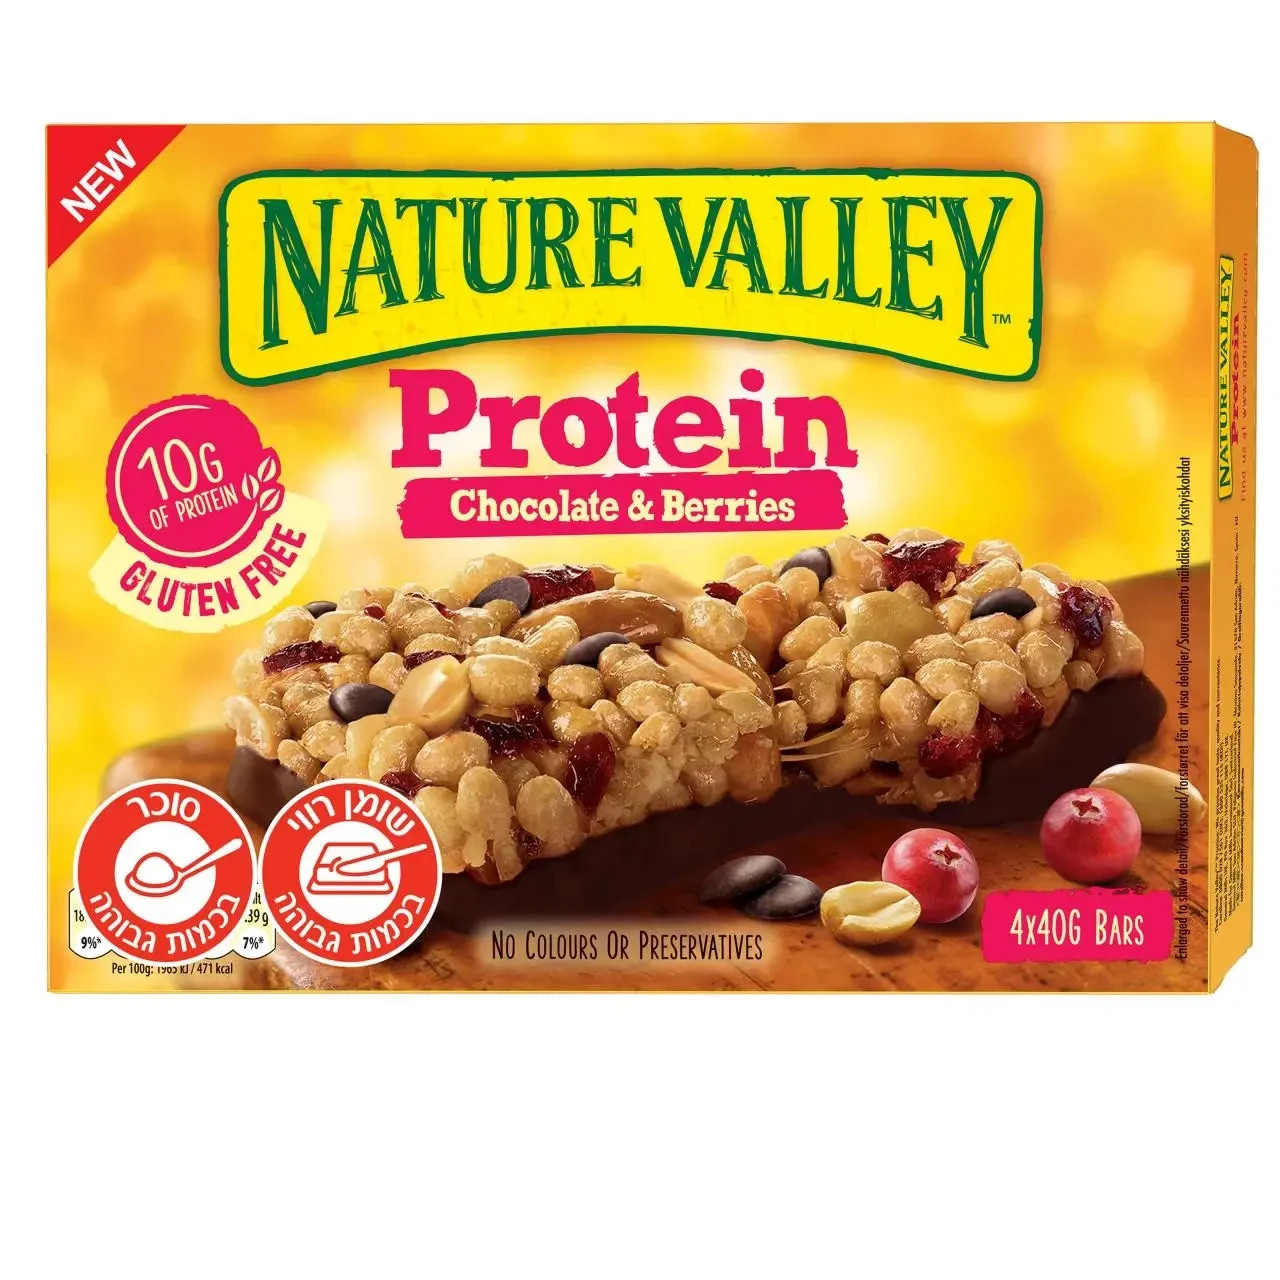   (credit: NATURE VALLEY)